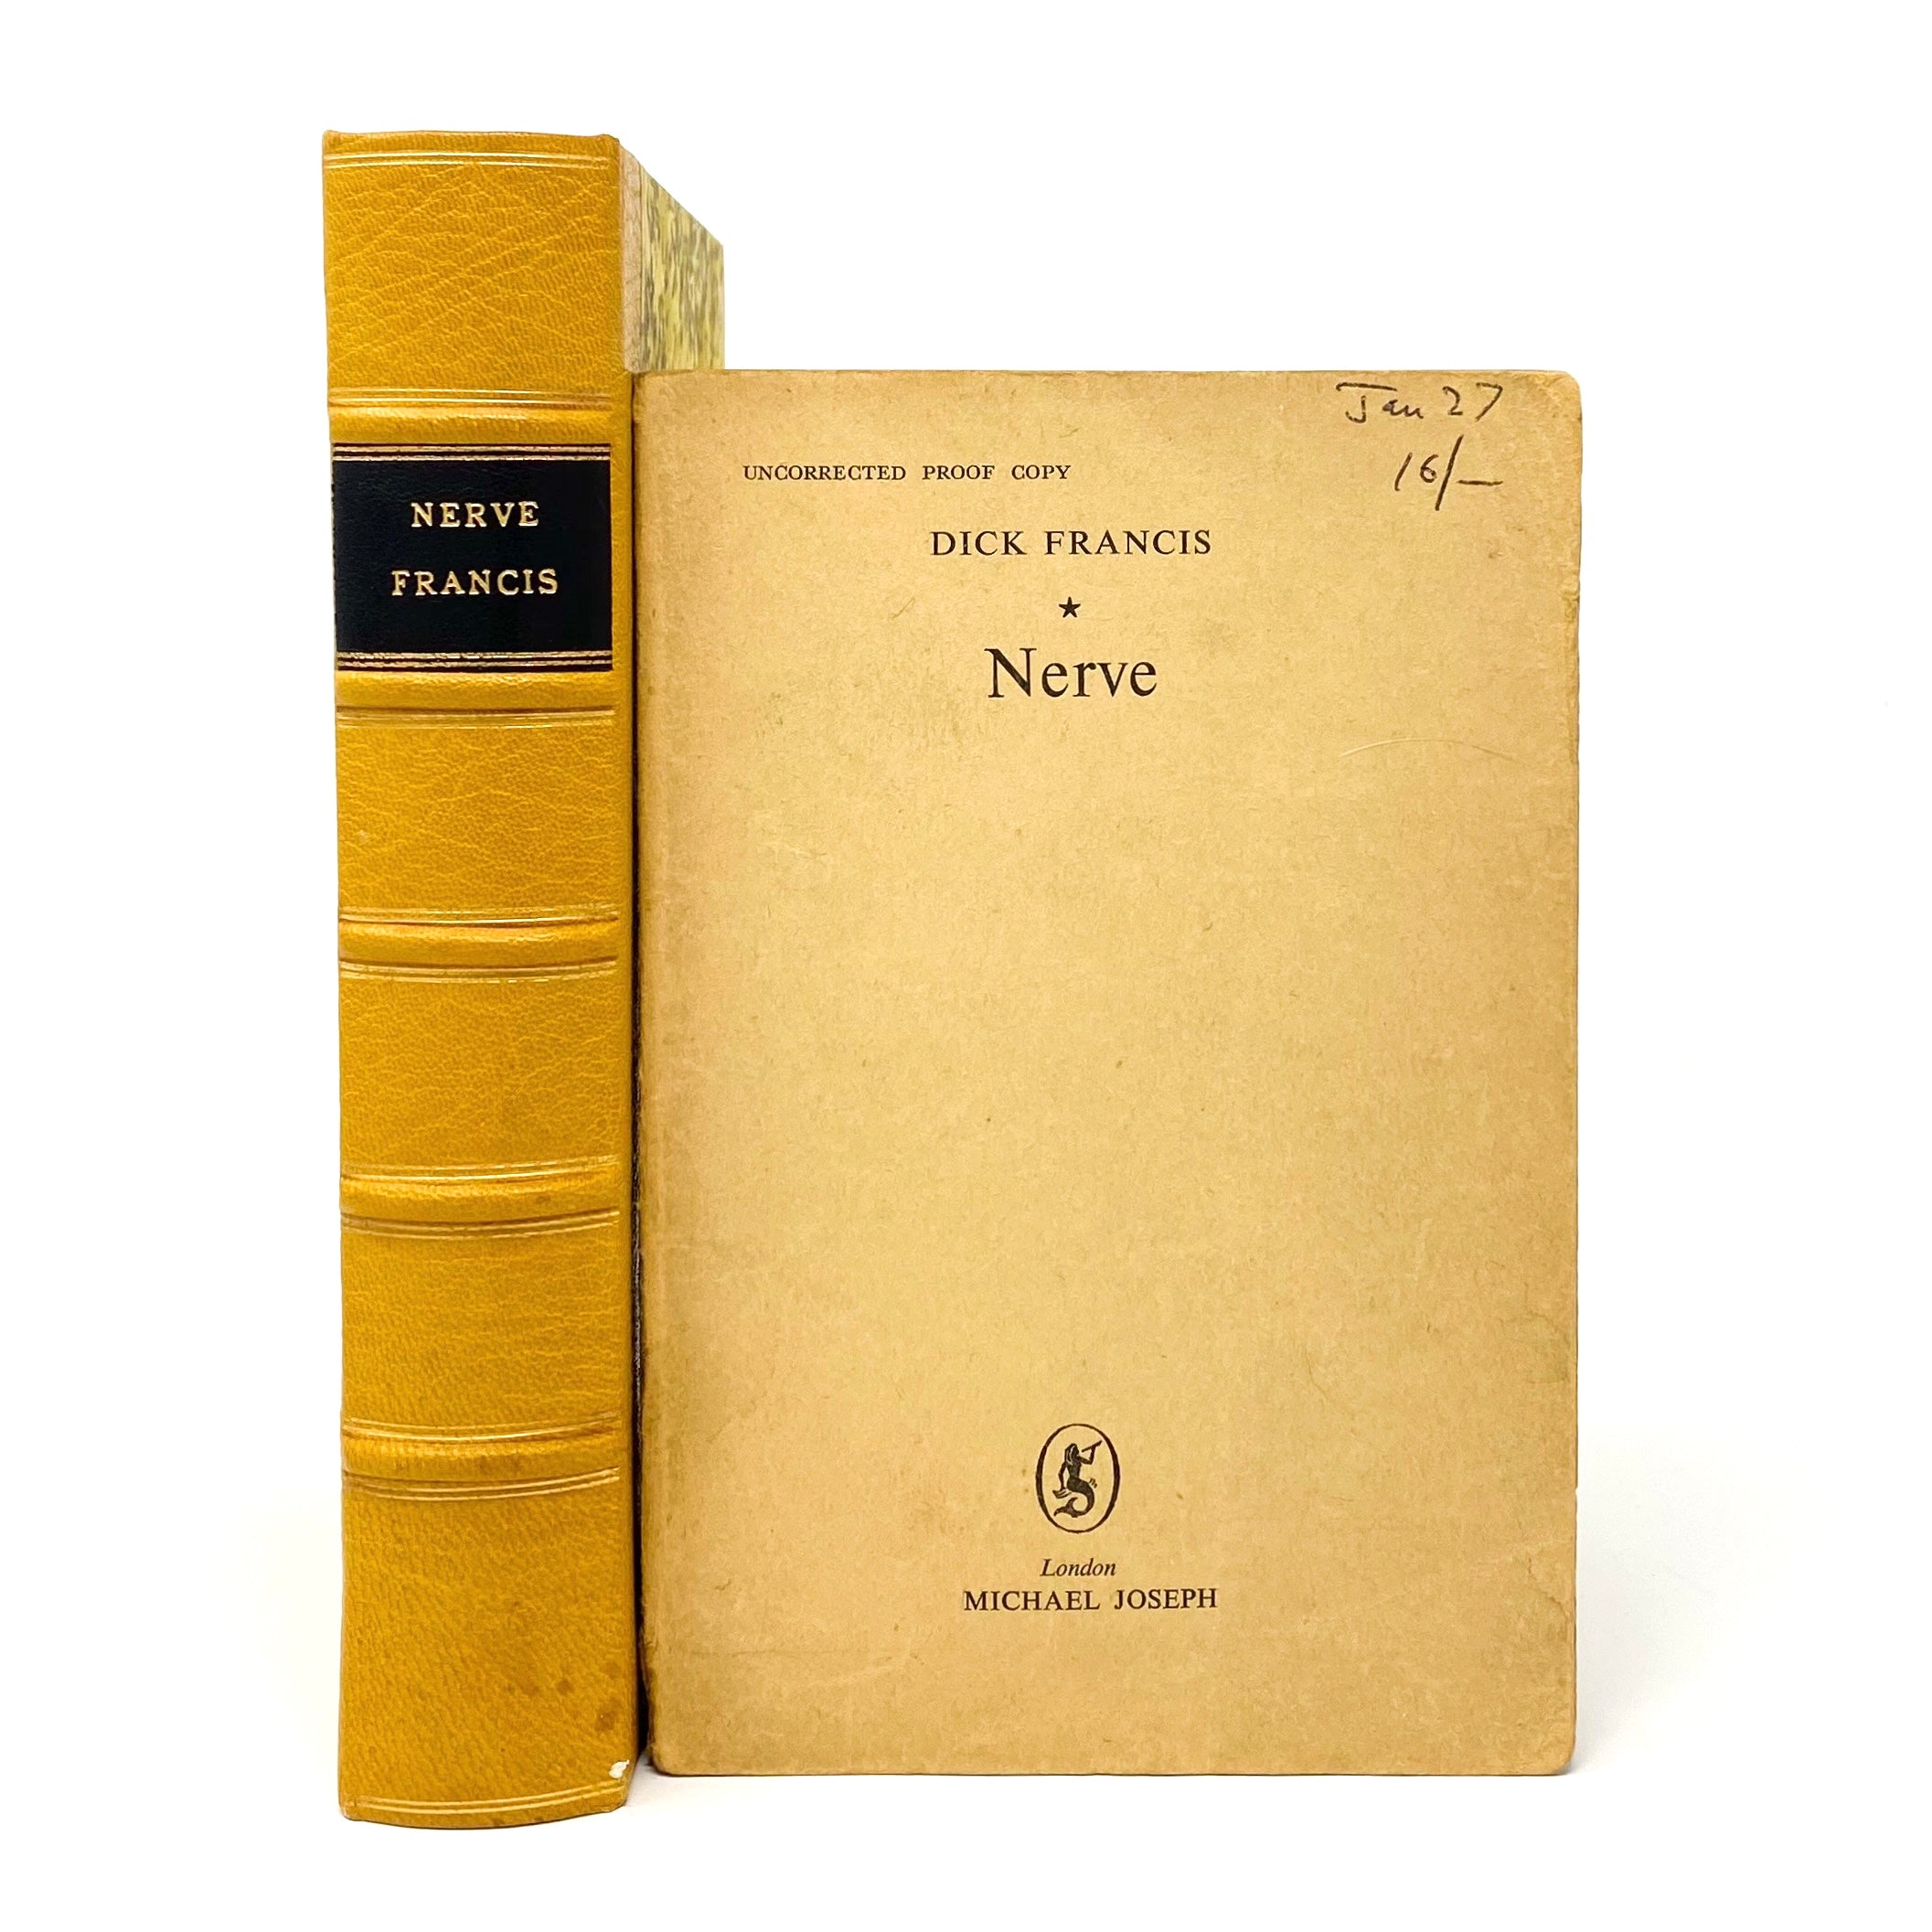 Nerve by Dick Francis